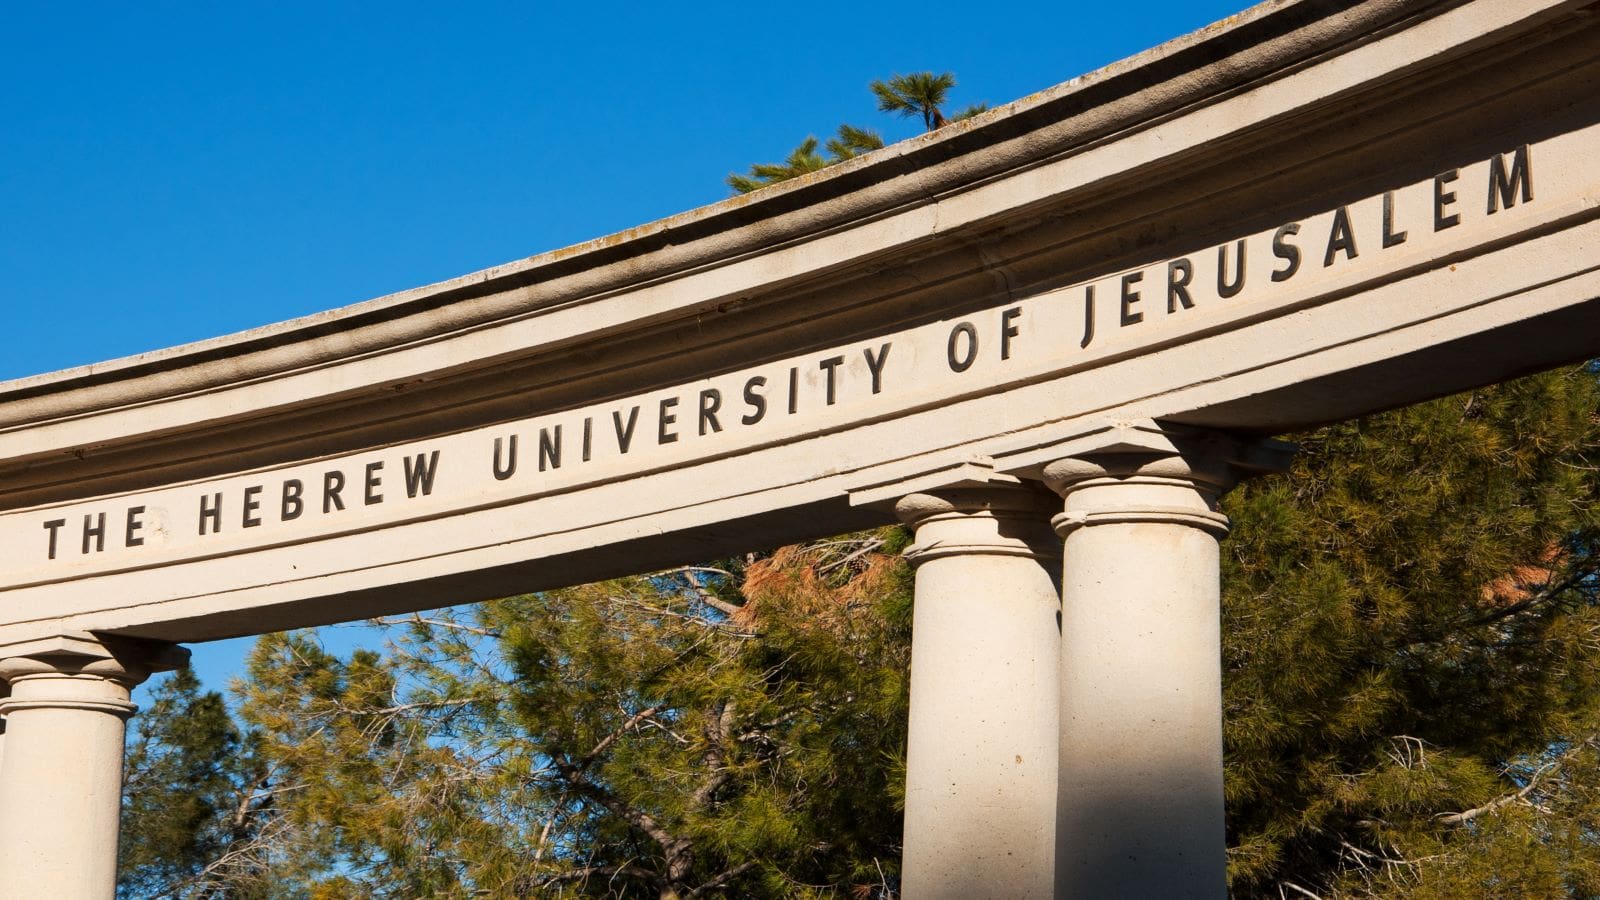 The Hebrew University of Jerusalem sign on the arch of the amphitheater at Mount Scopus (Har Ha-Tzofim) campus.